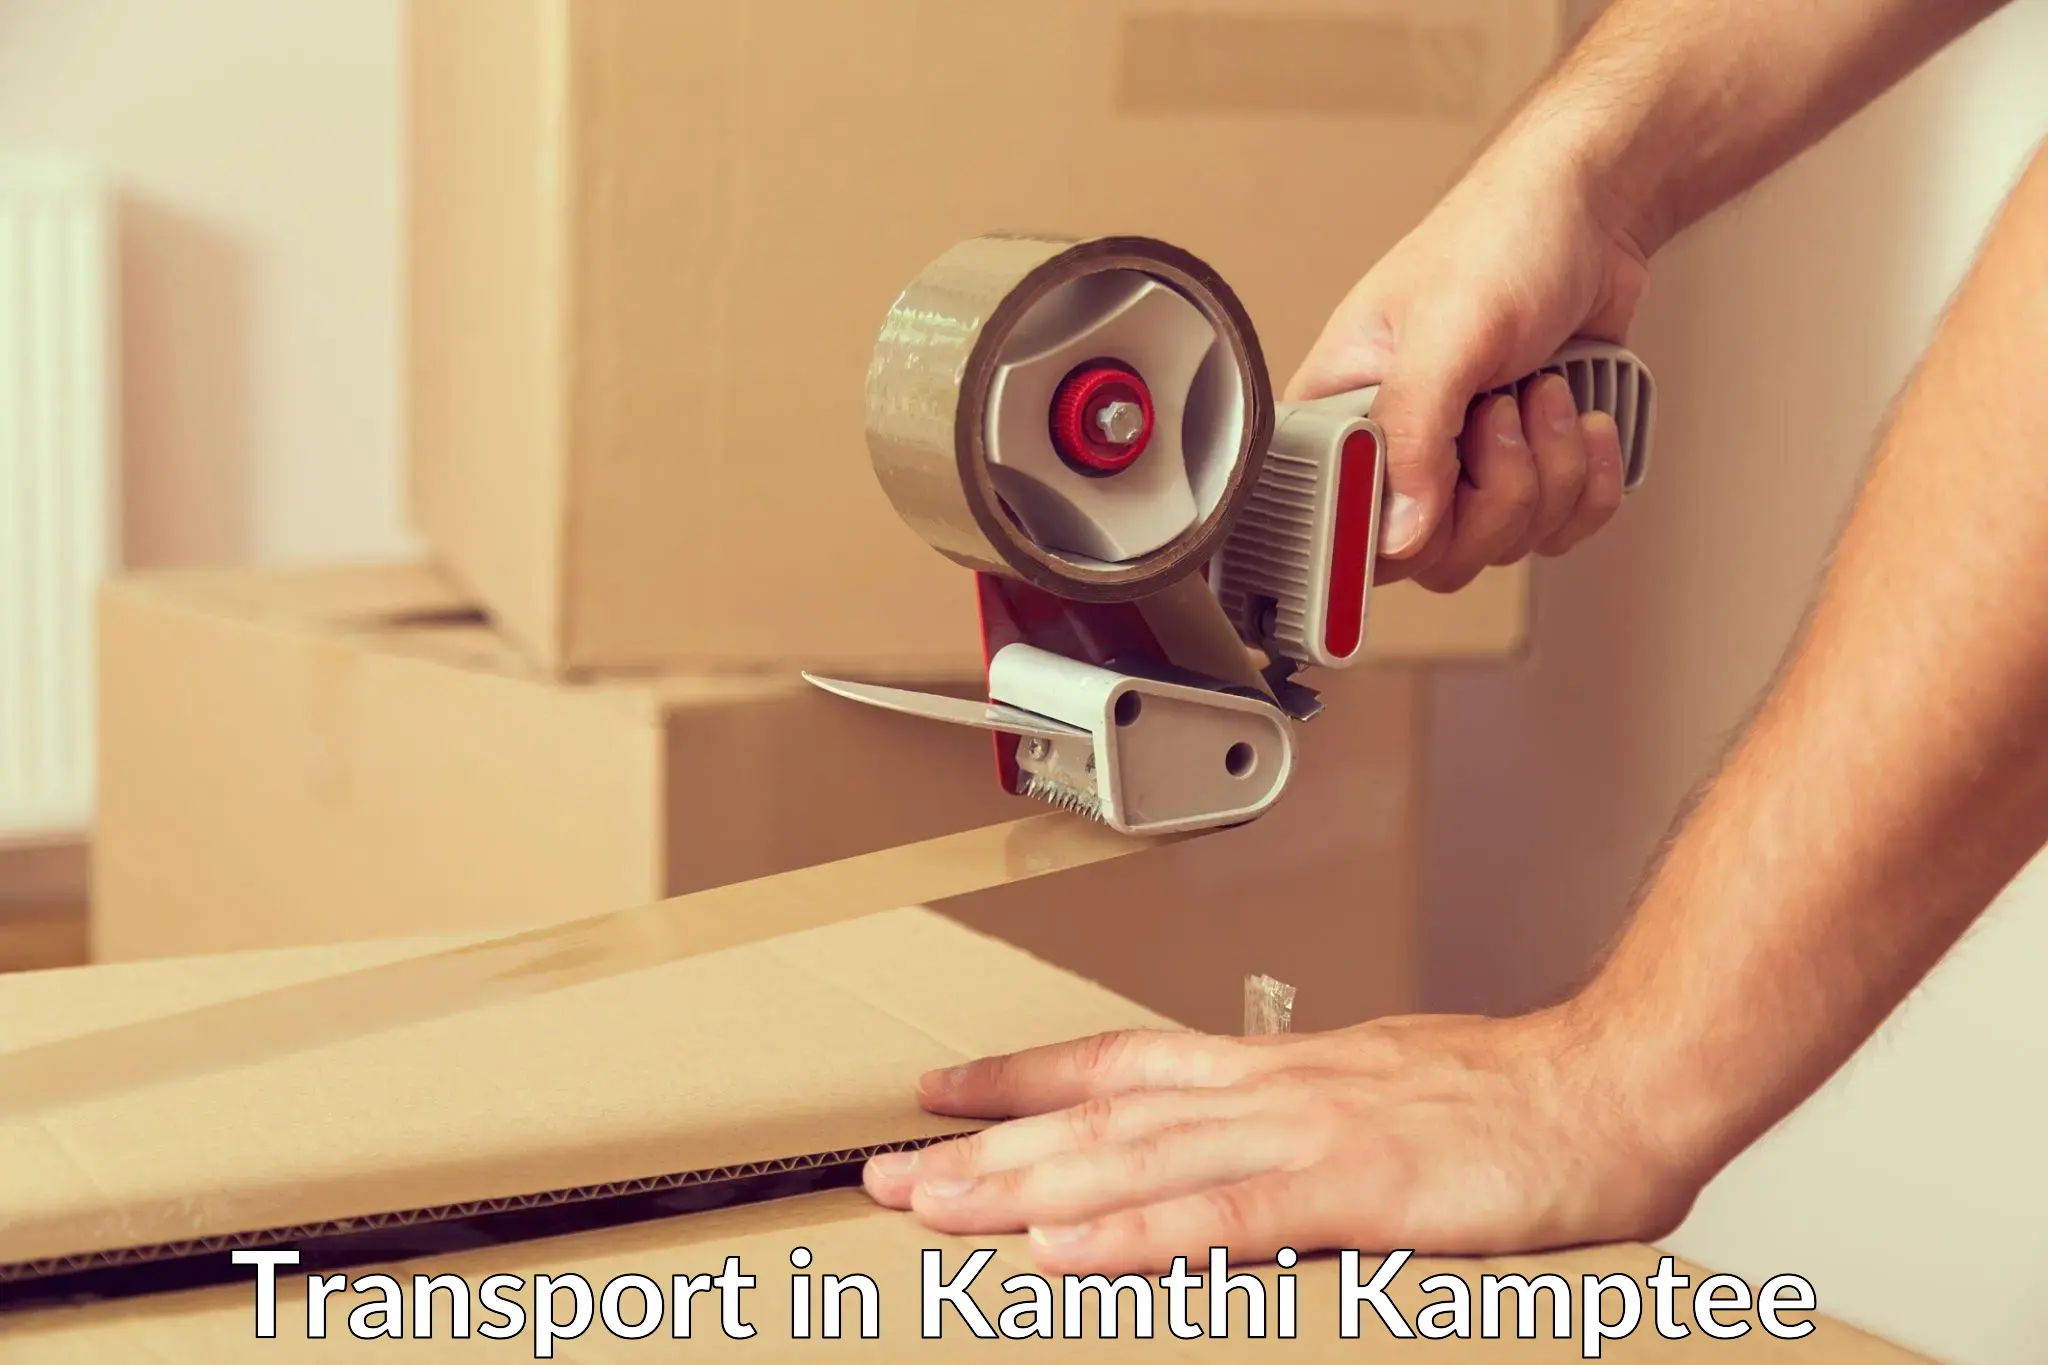 Two wheeler transport services in Kamthi Kamptee